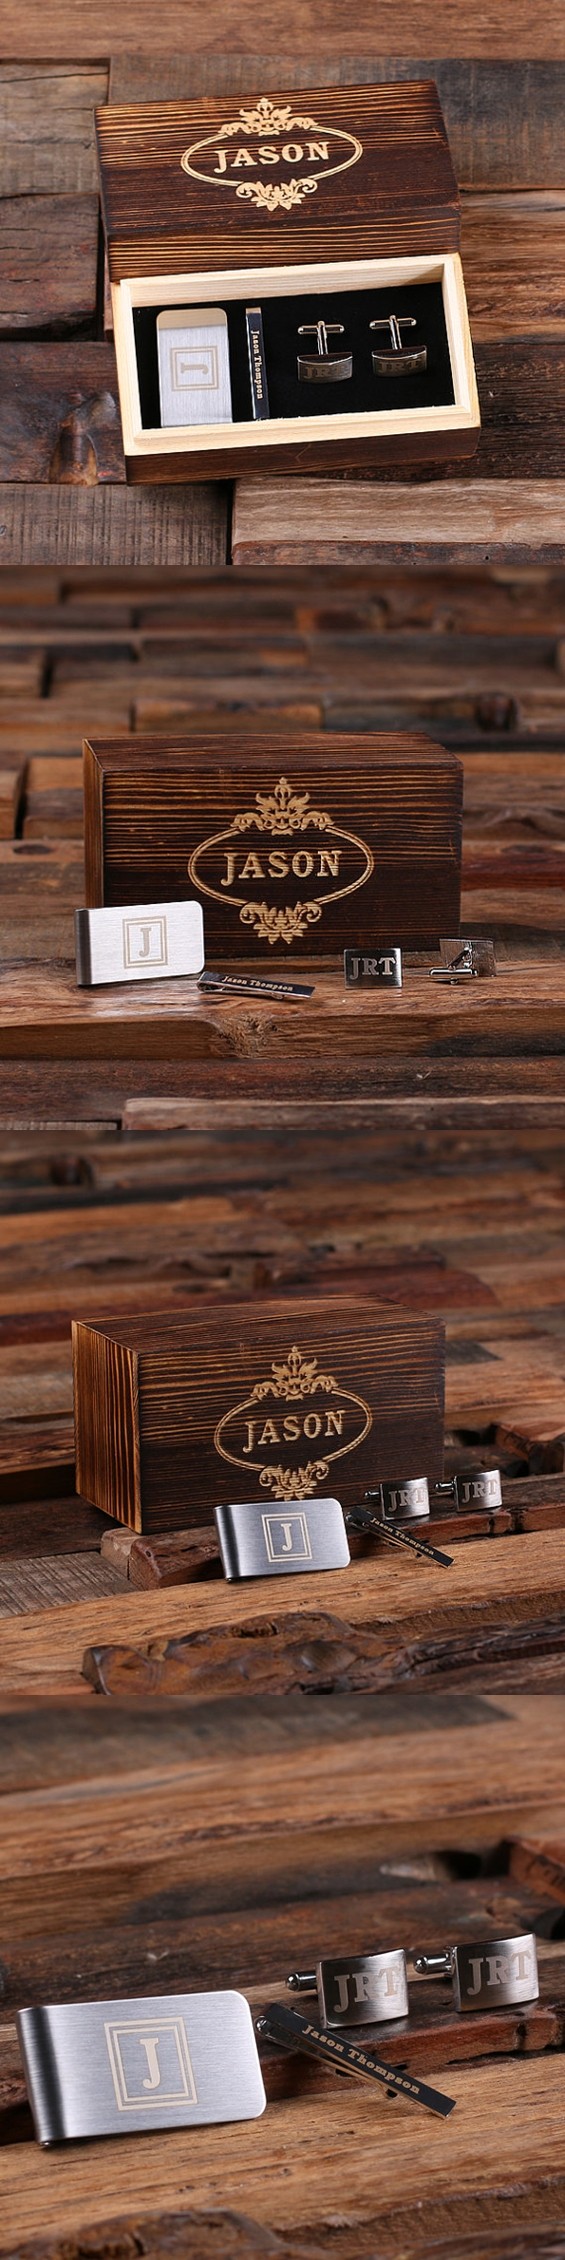 Personalized Money Clip, Tie Clip and Cuff Links in Wood Gift-Box